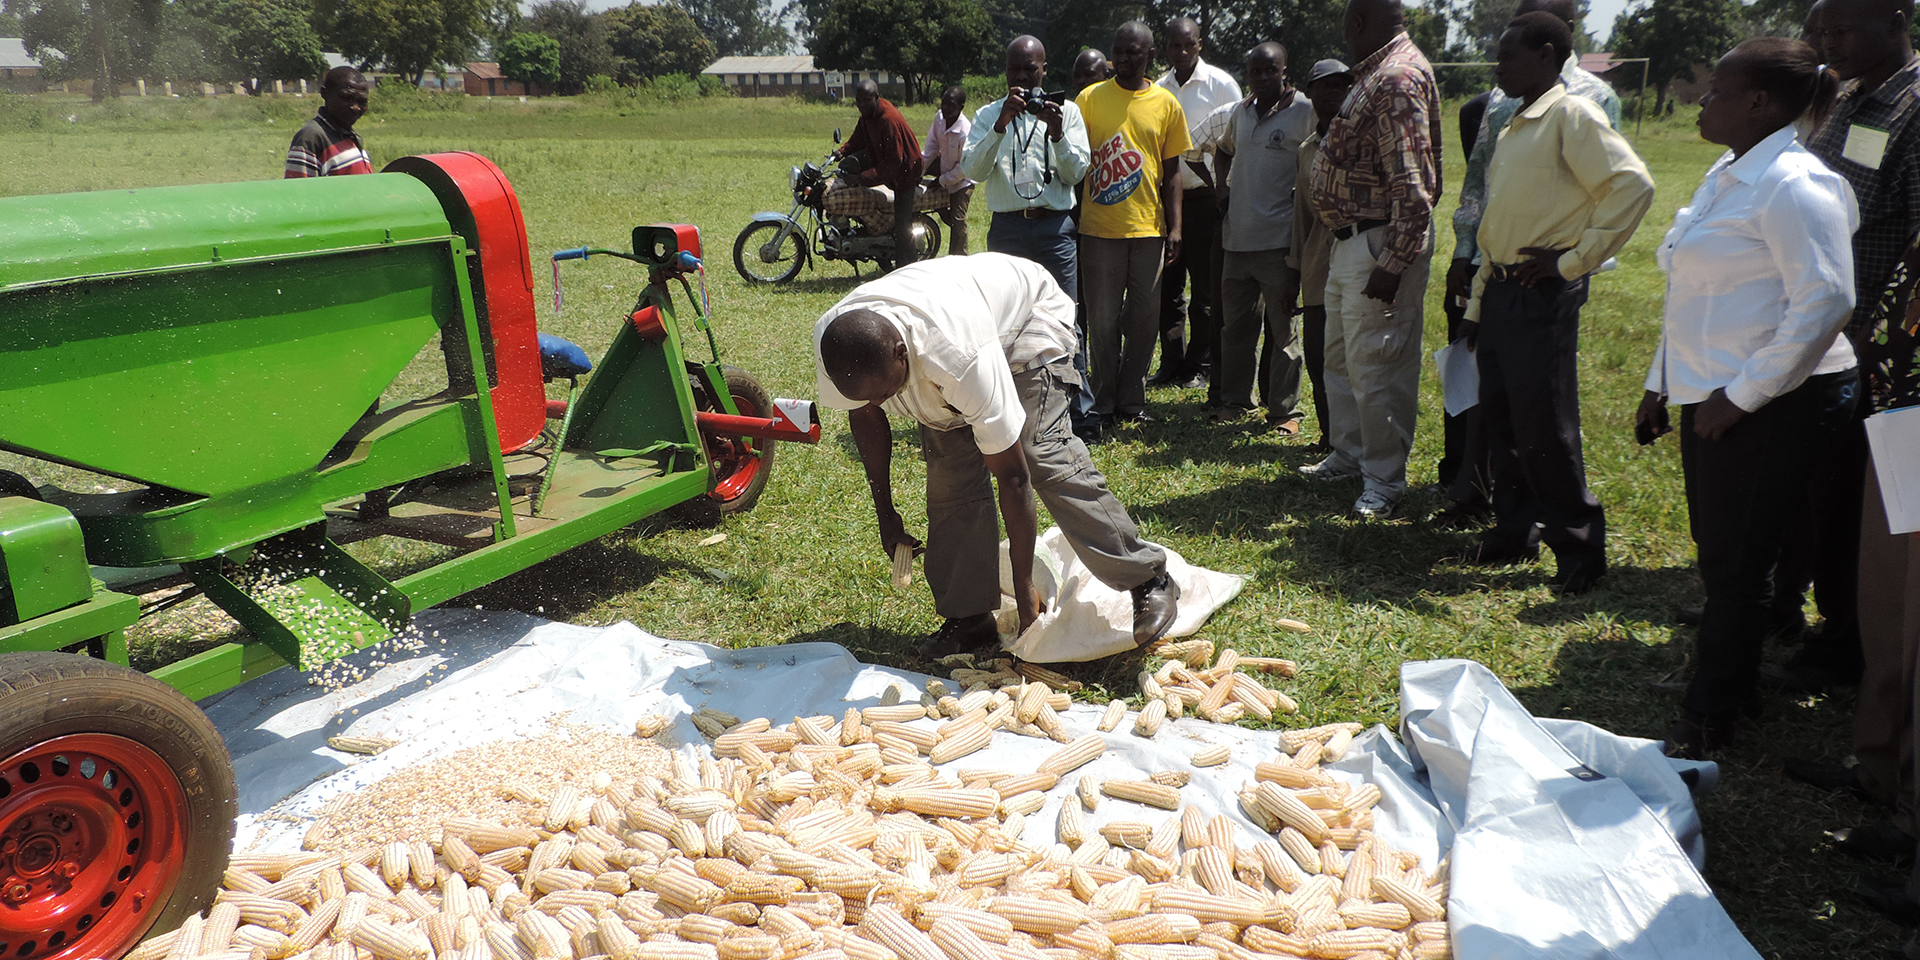 A large pile of corn being gathered by a man holding a bag. Beside the pile is a green vehicle that is dispensing individual kernels.